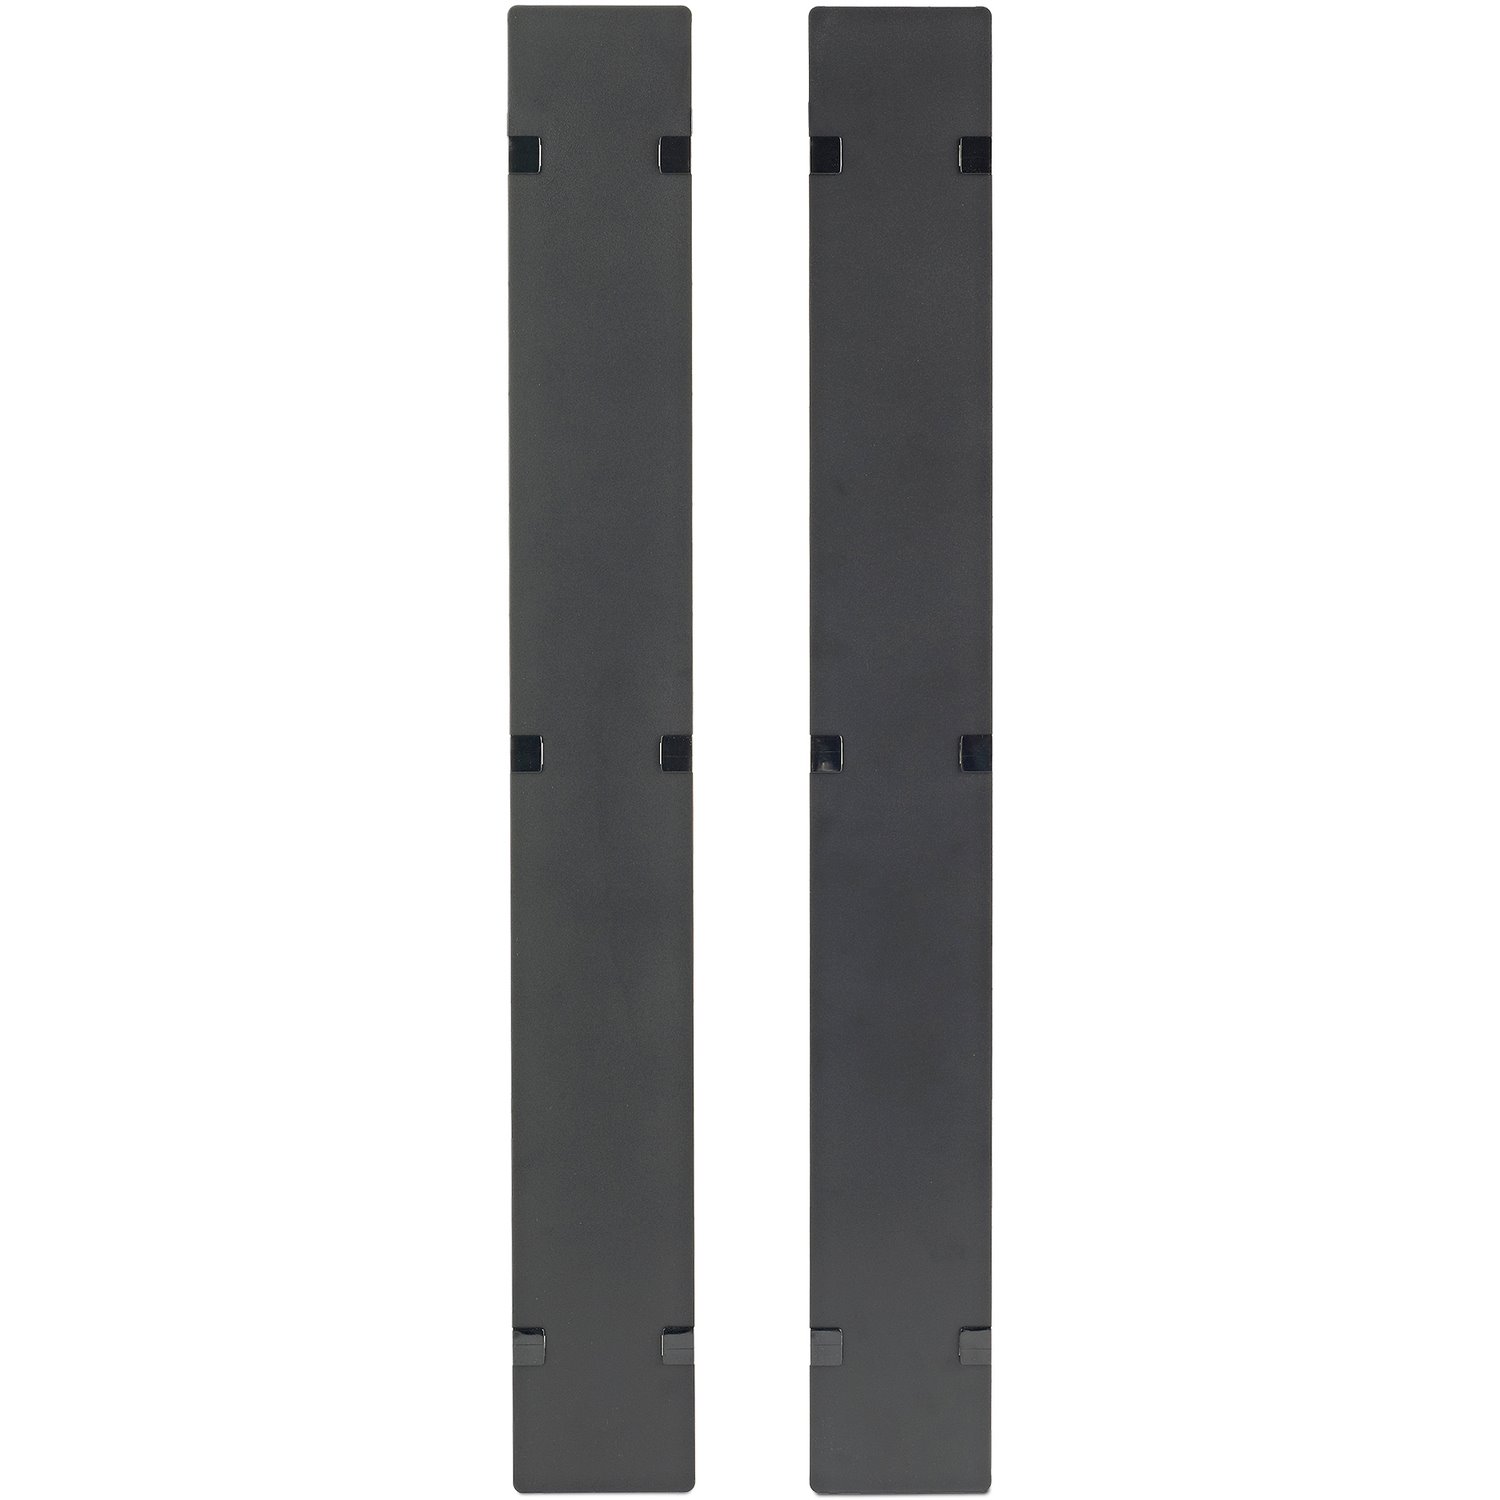 APC by Schneider Electric AR7586 Cable Organizer - Black - 2 Pack - TAA Compliant